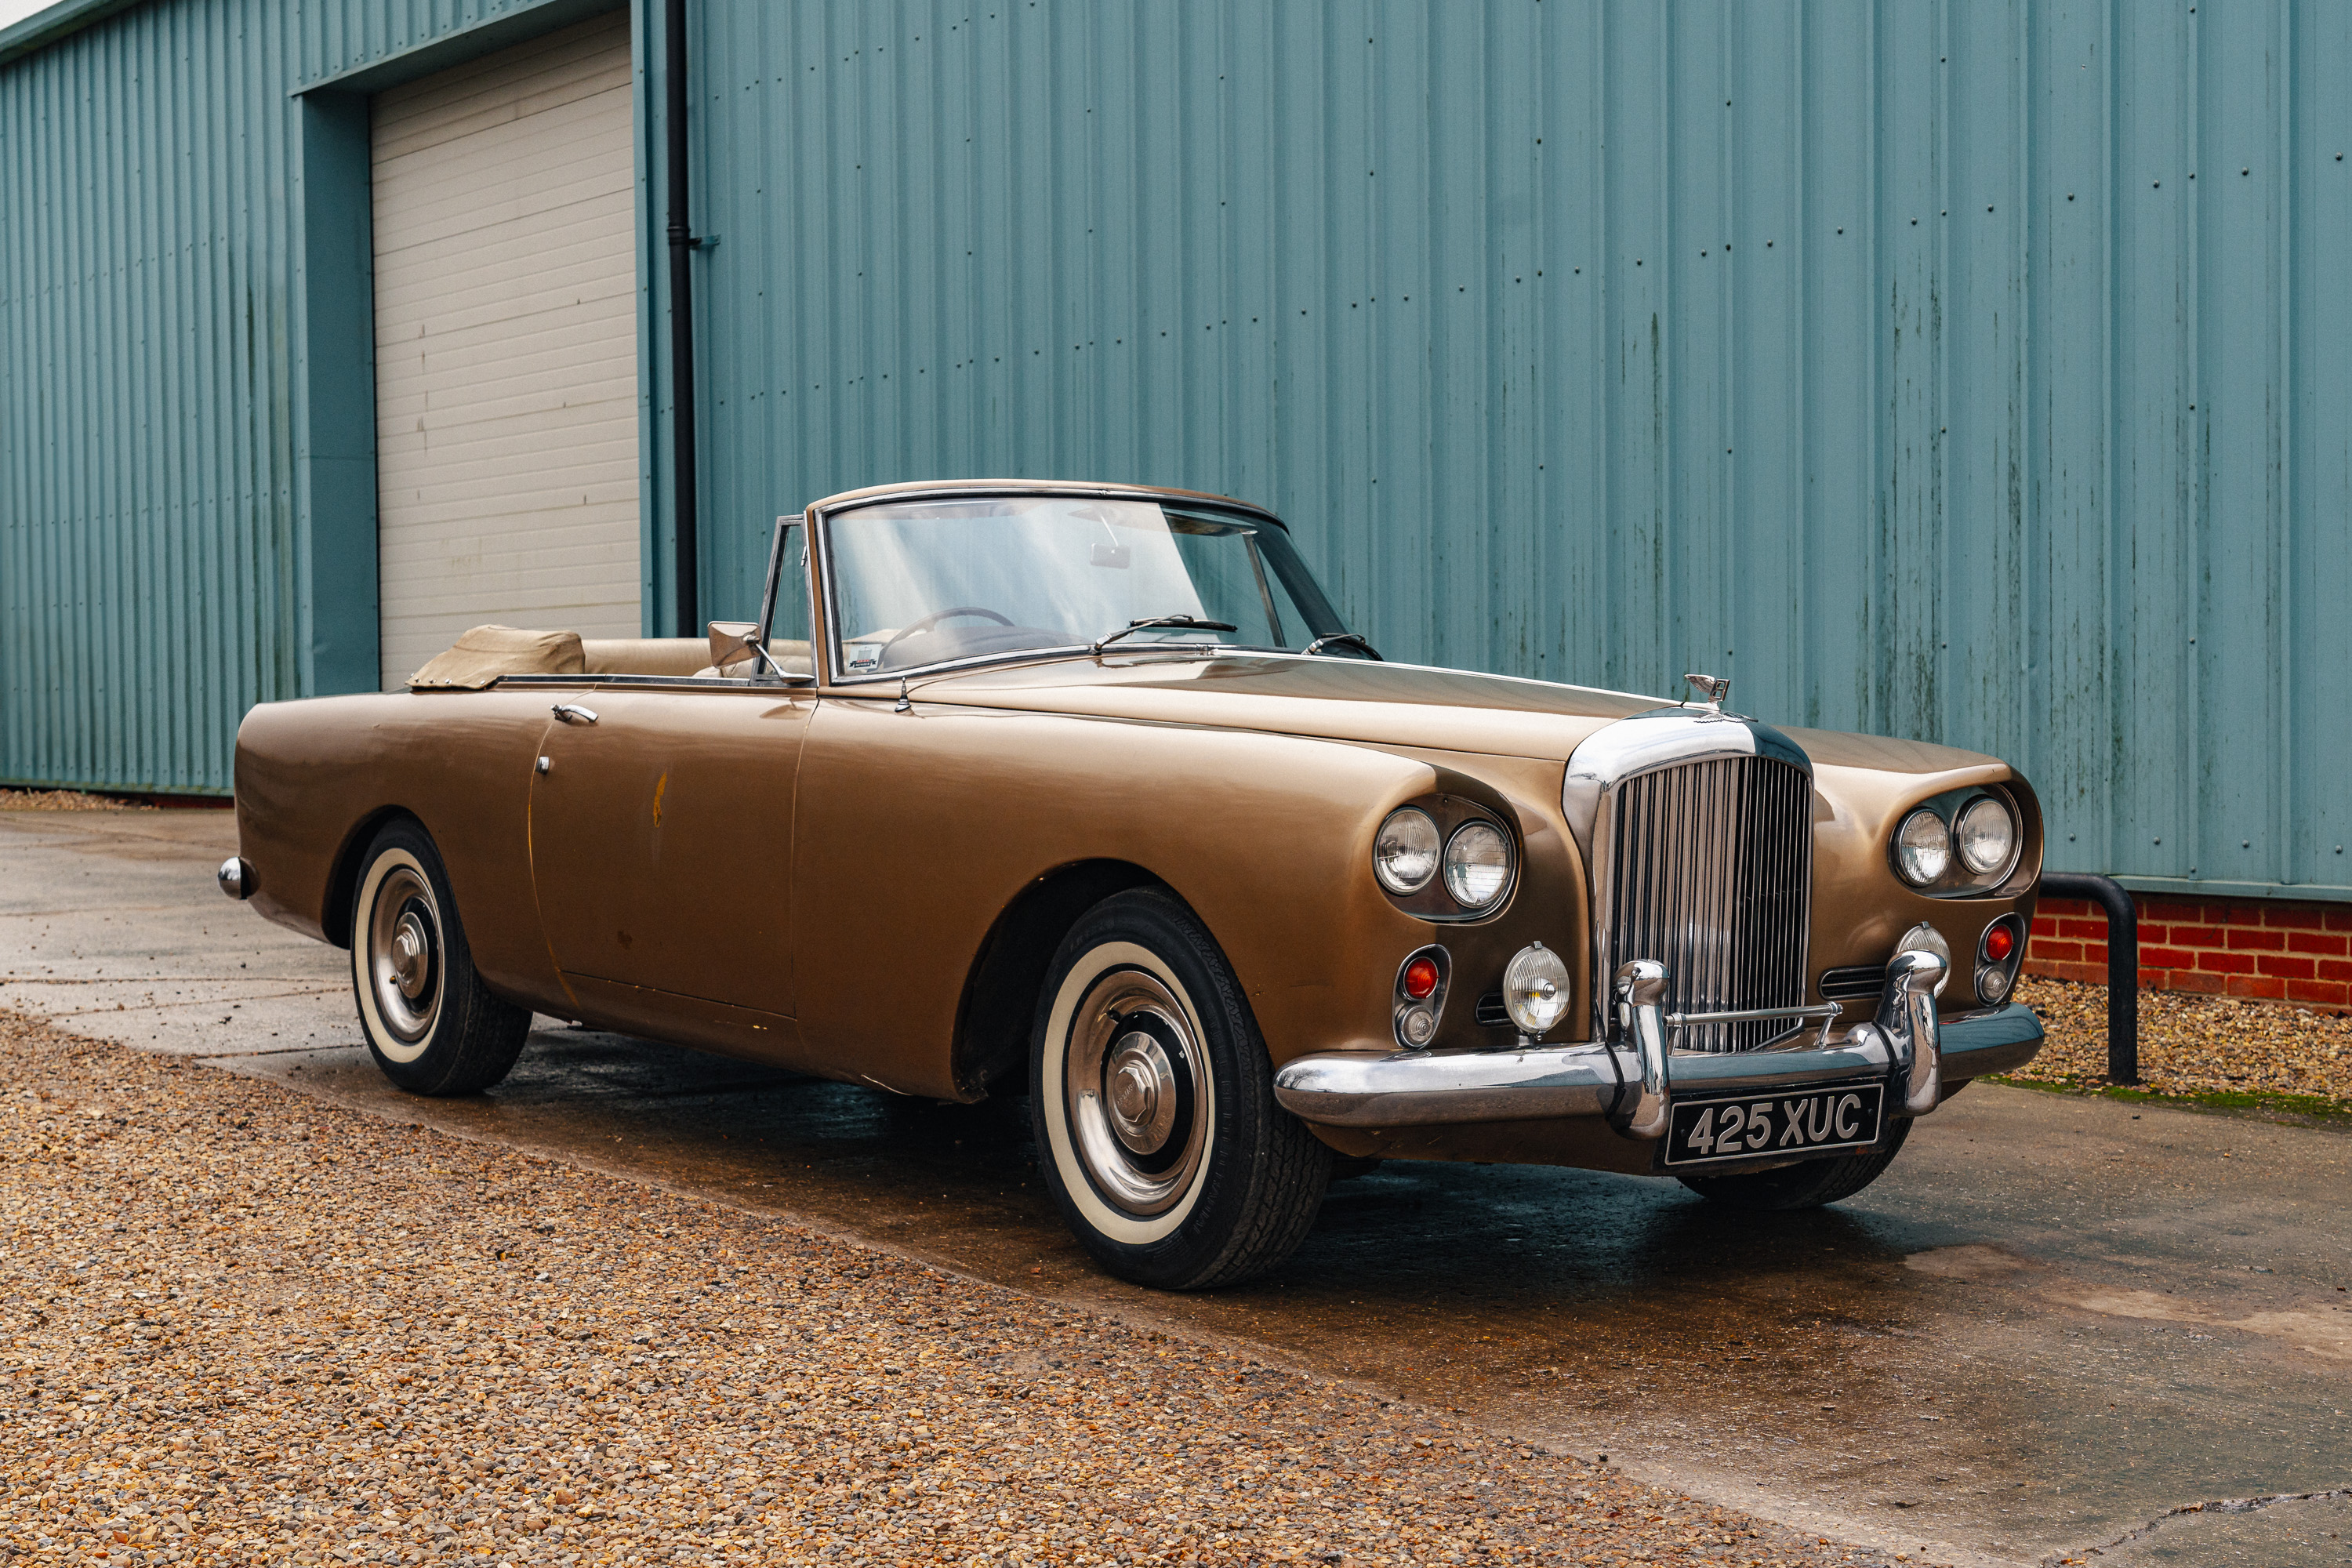 Goon, Goon, Gone: Unique Peter Sellers 1960 Bentley heads to auction